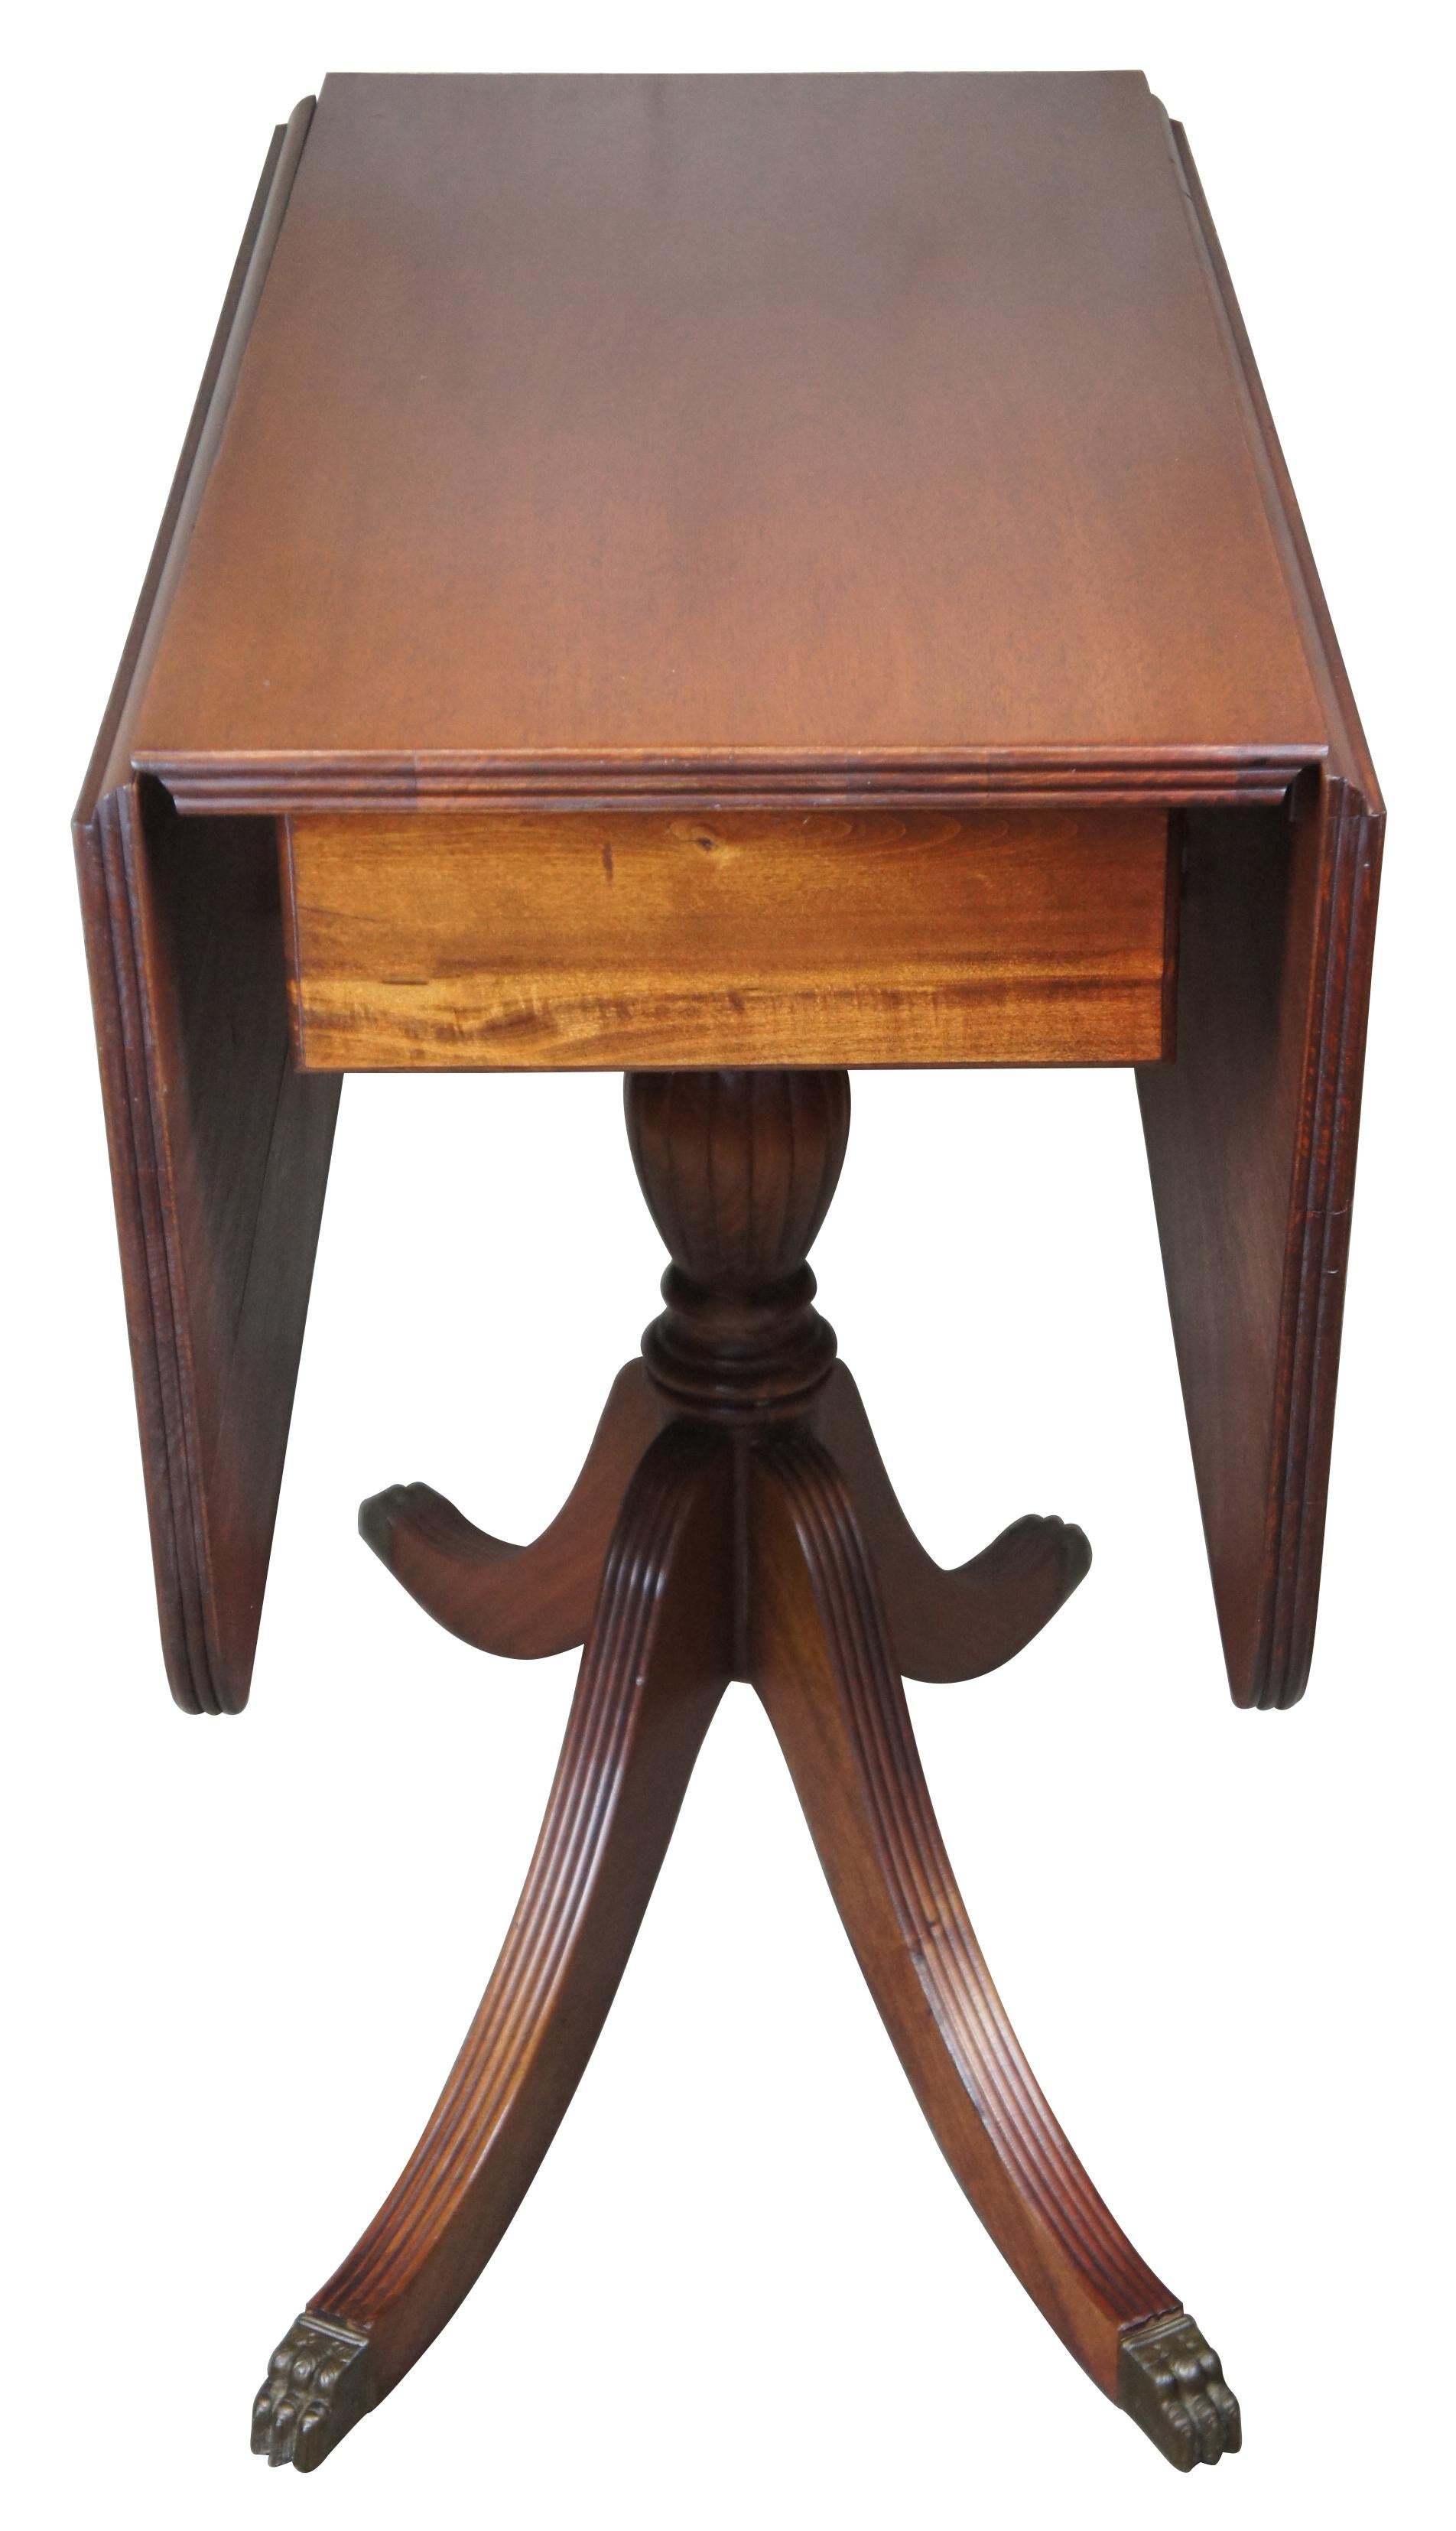 Circa 1940's Duncan Phyfe / Sheraton style mahogany drop leaf breakfast table or console. Features two drop leaves, turned pedestal and four sabre legs capped with brass paw feet. 

Folded - 16